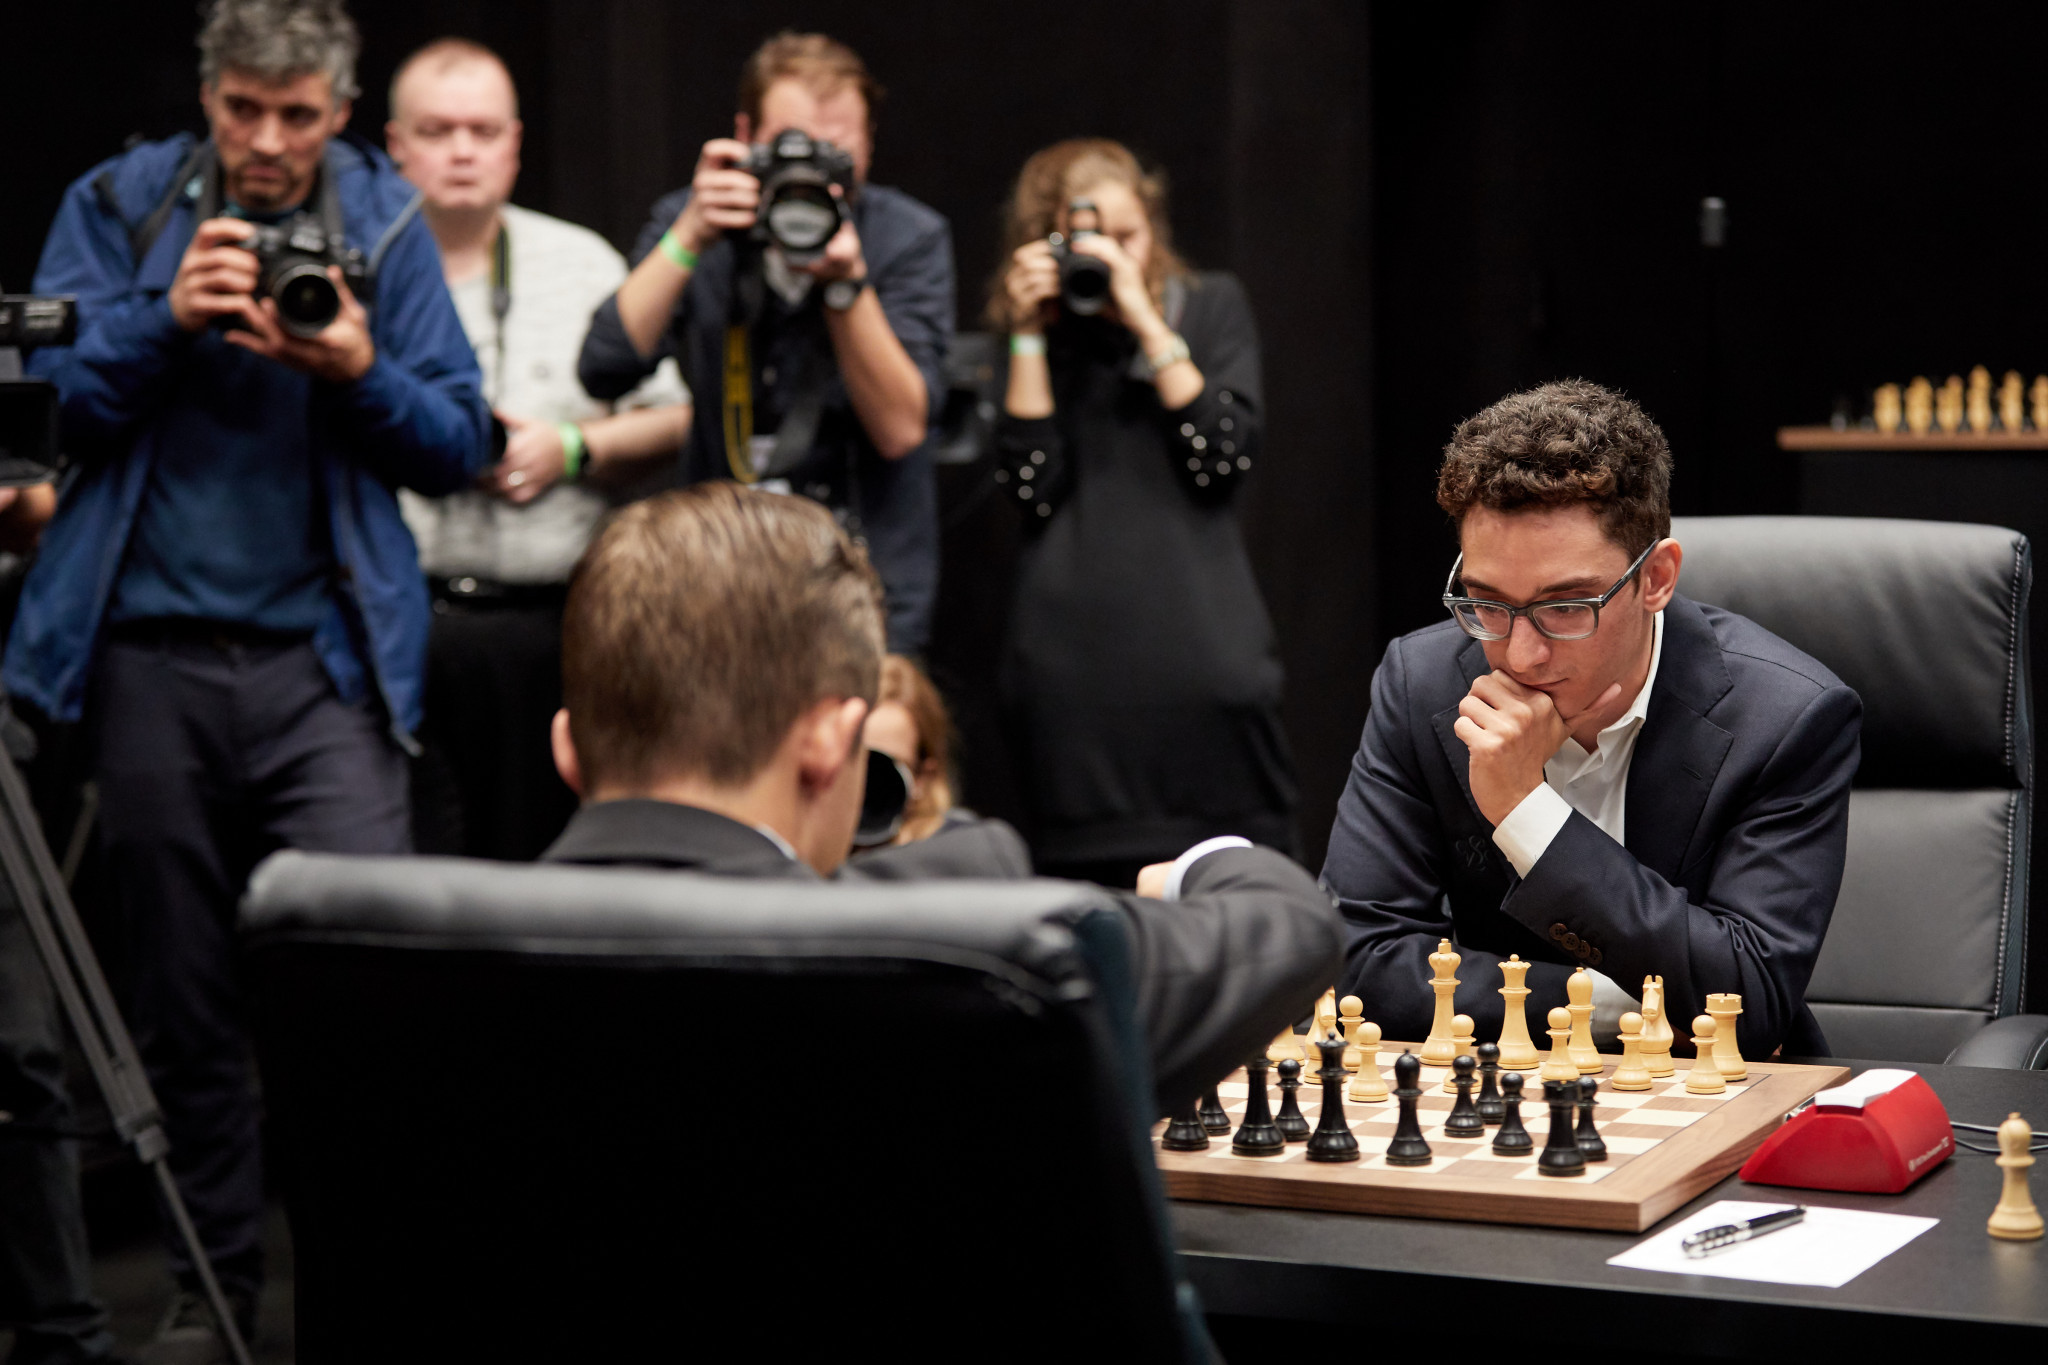 Fifth draw for Carlsen and Caruana as defending women’s world chess champion Ju closes on final